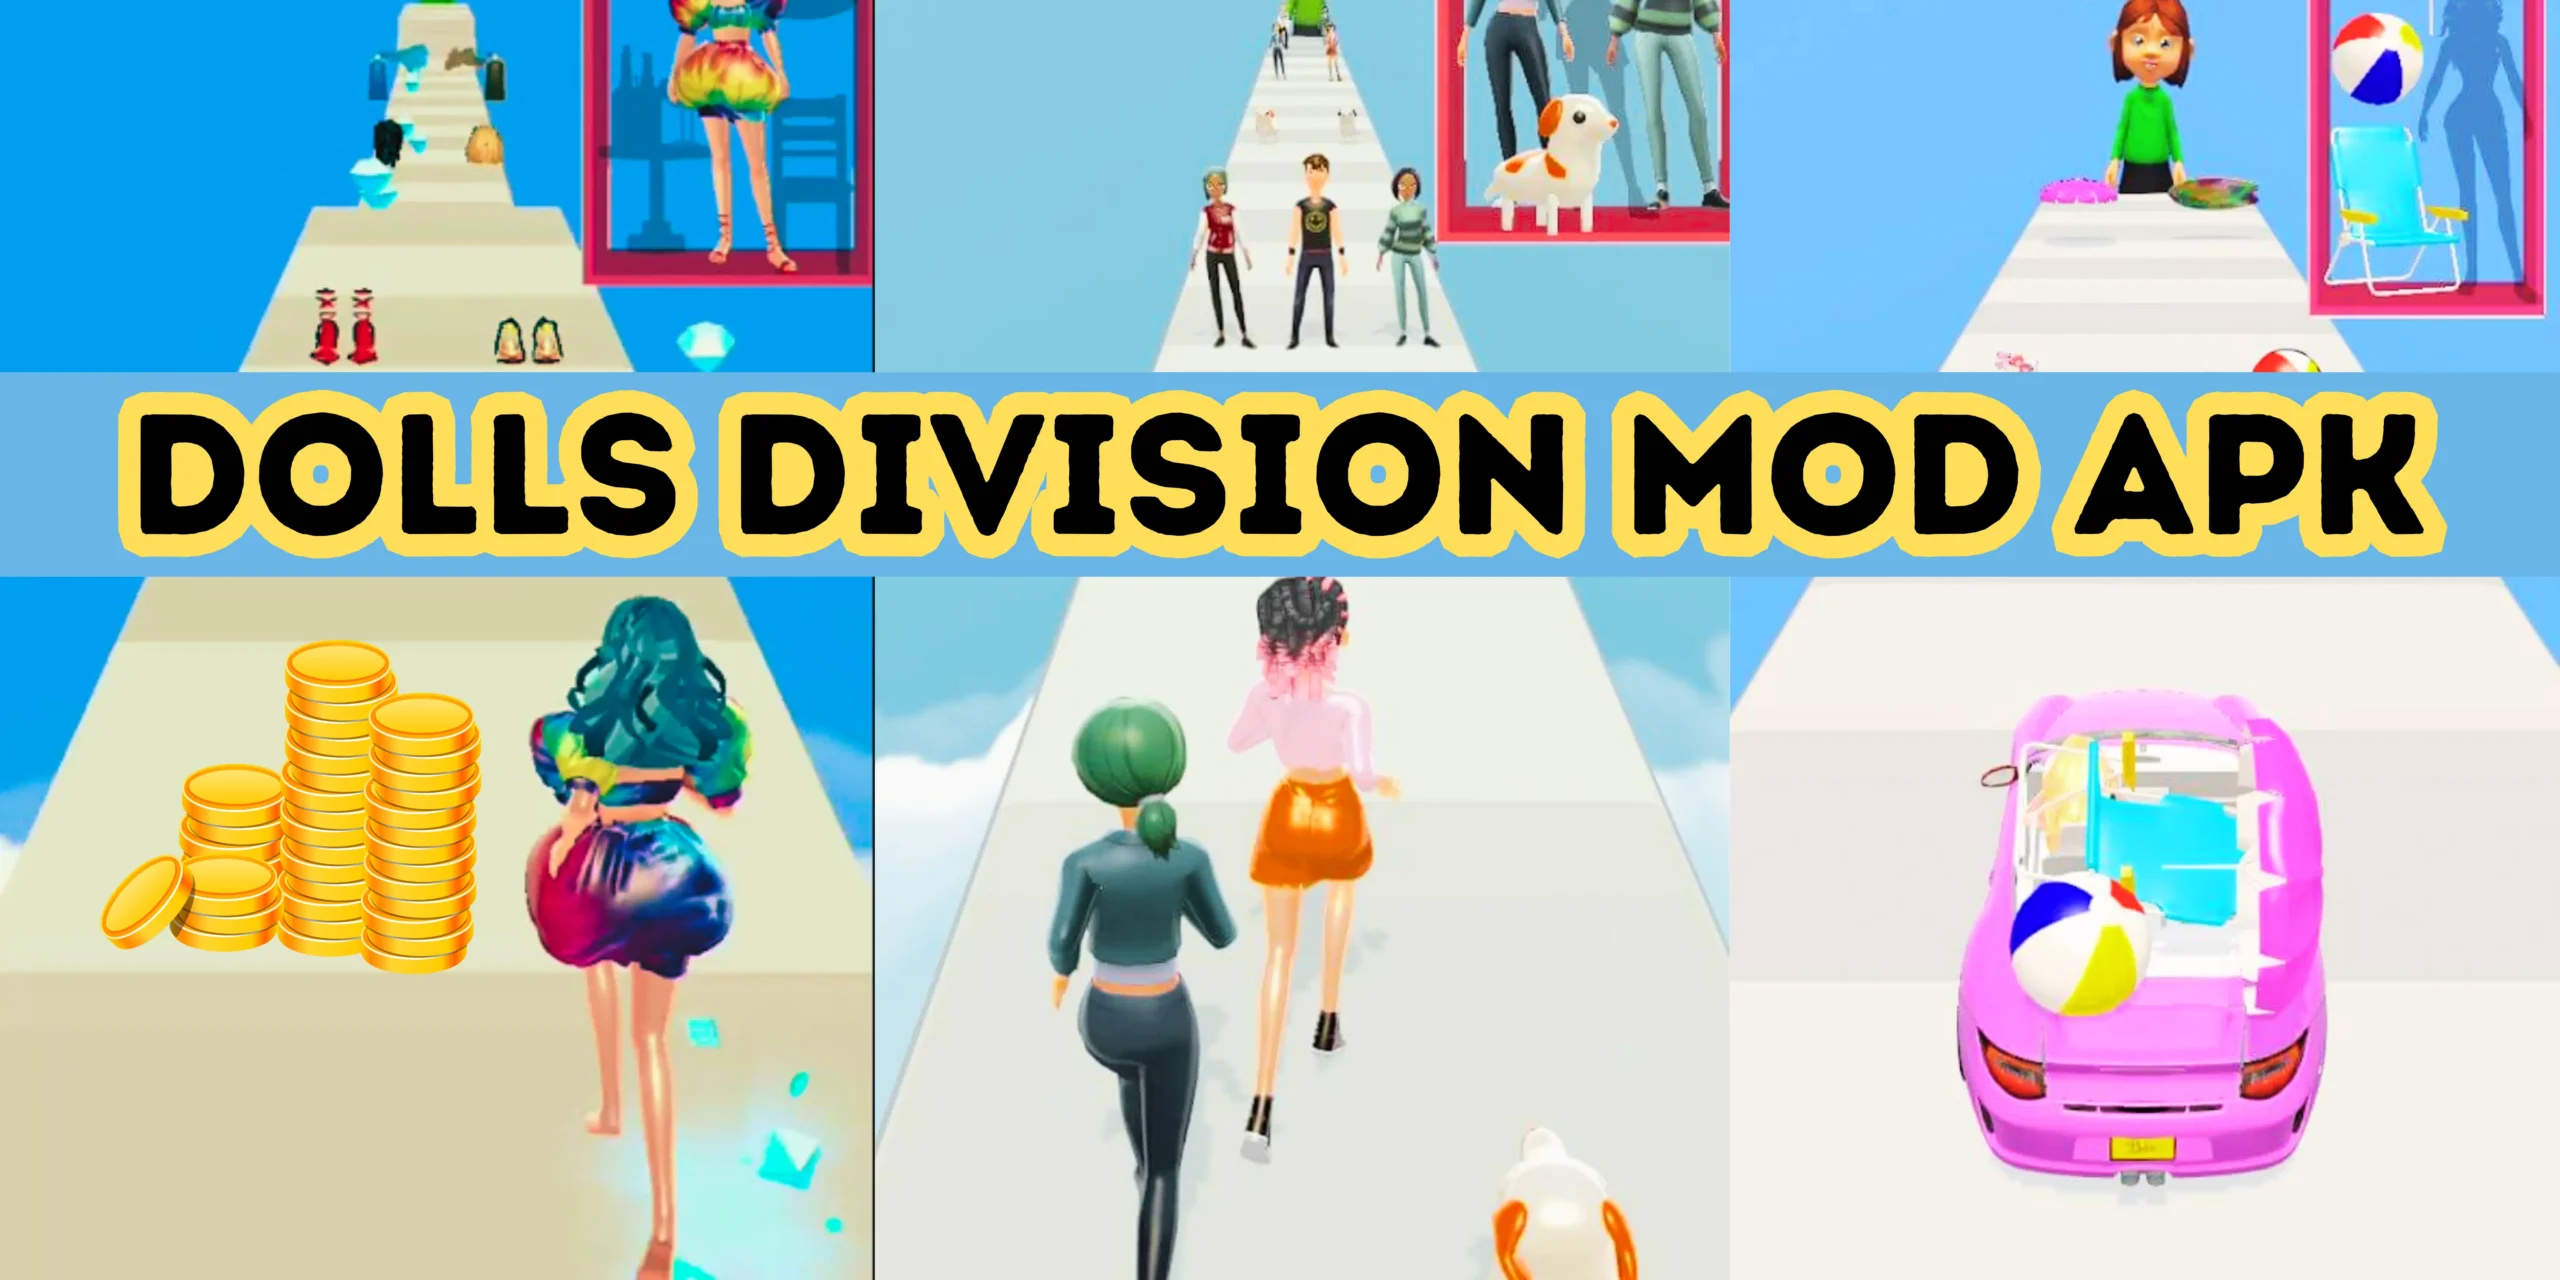 Dolls Division Mod APK: Elevate Your Gaming Experience